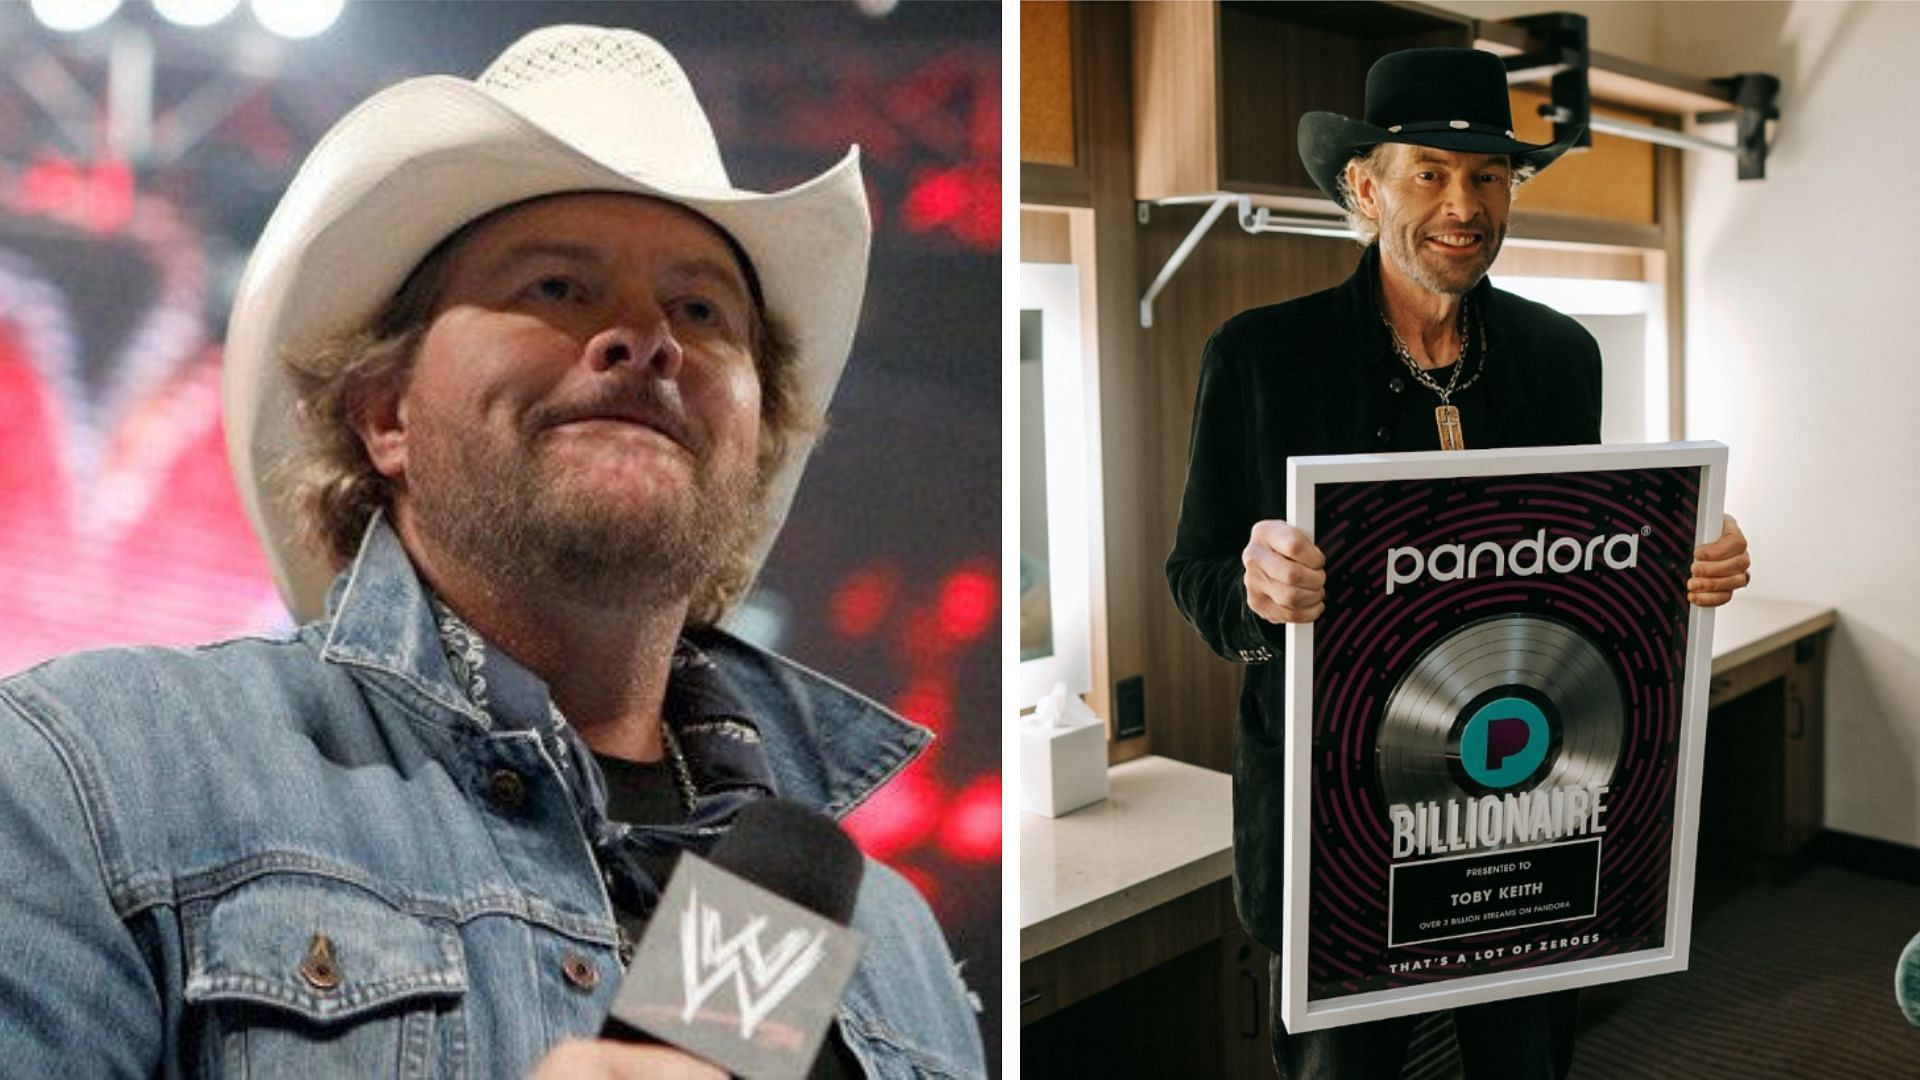 Toby Keith also some memorable times in WWE